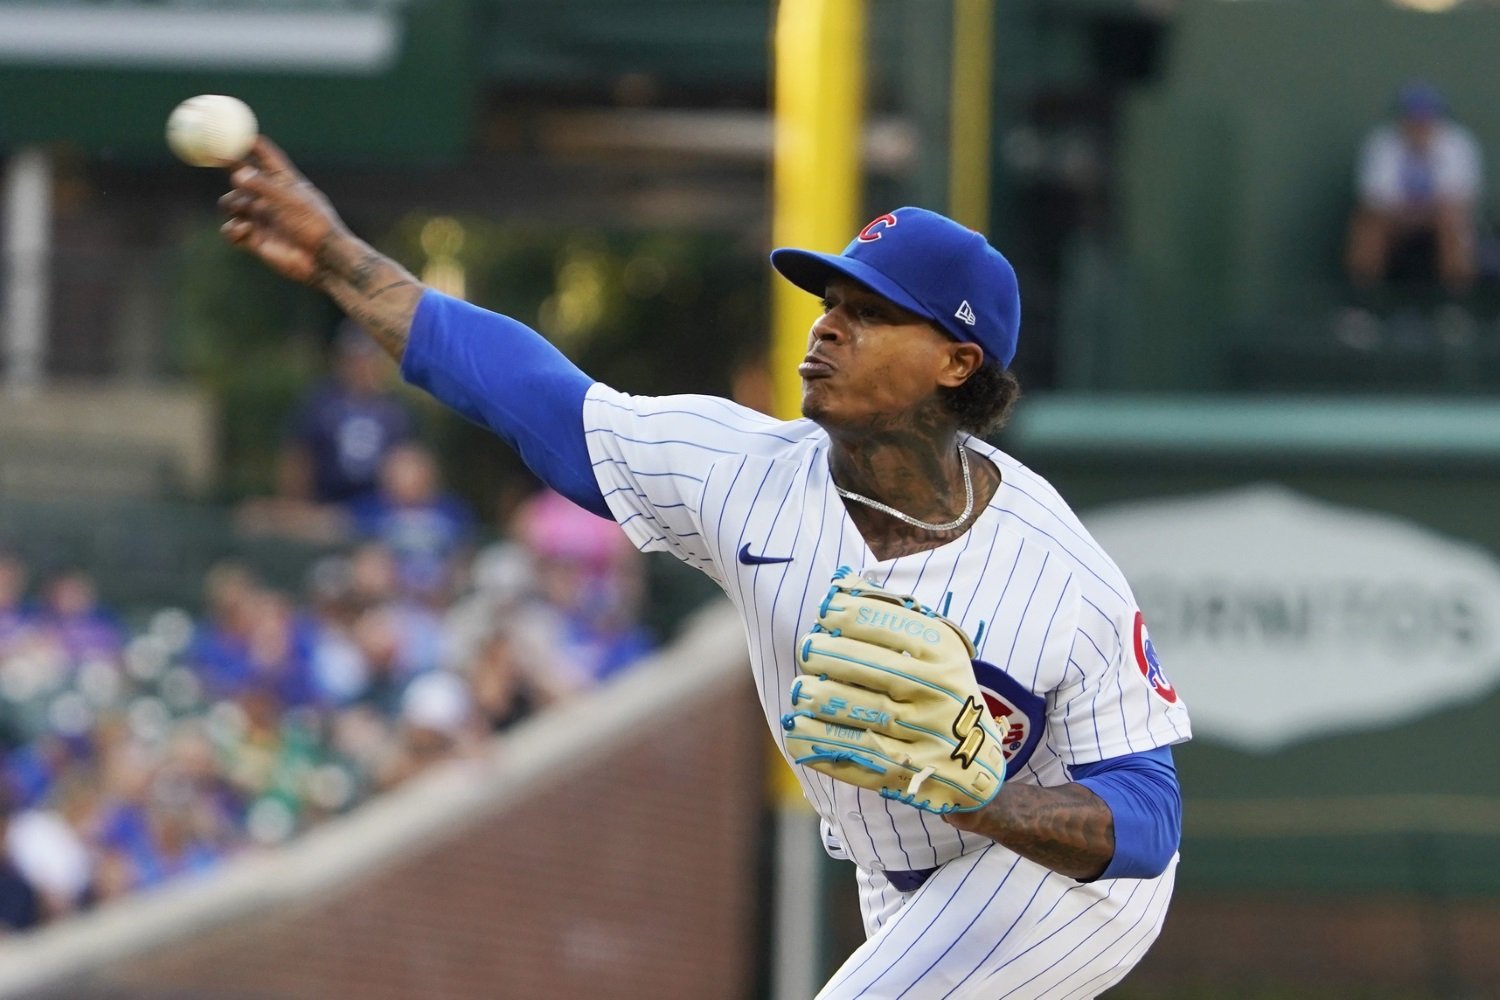 How will the Cubs deal with this looming roster crunch?